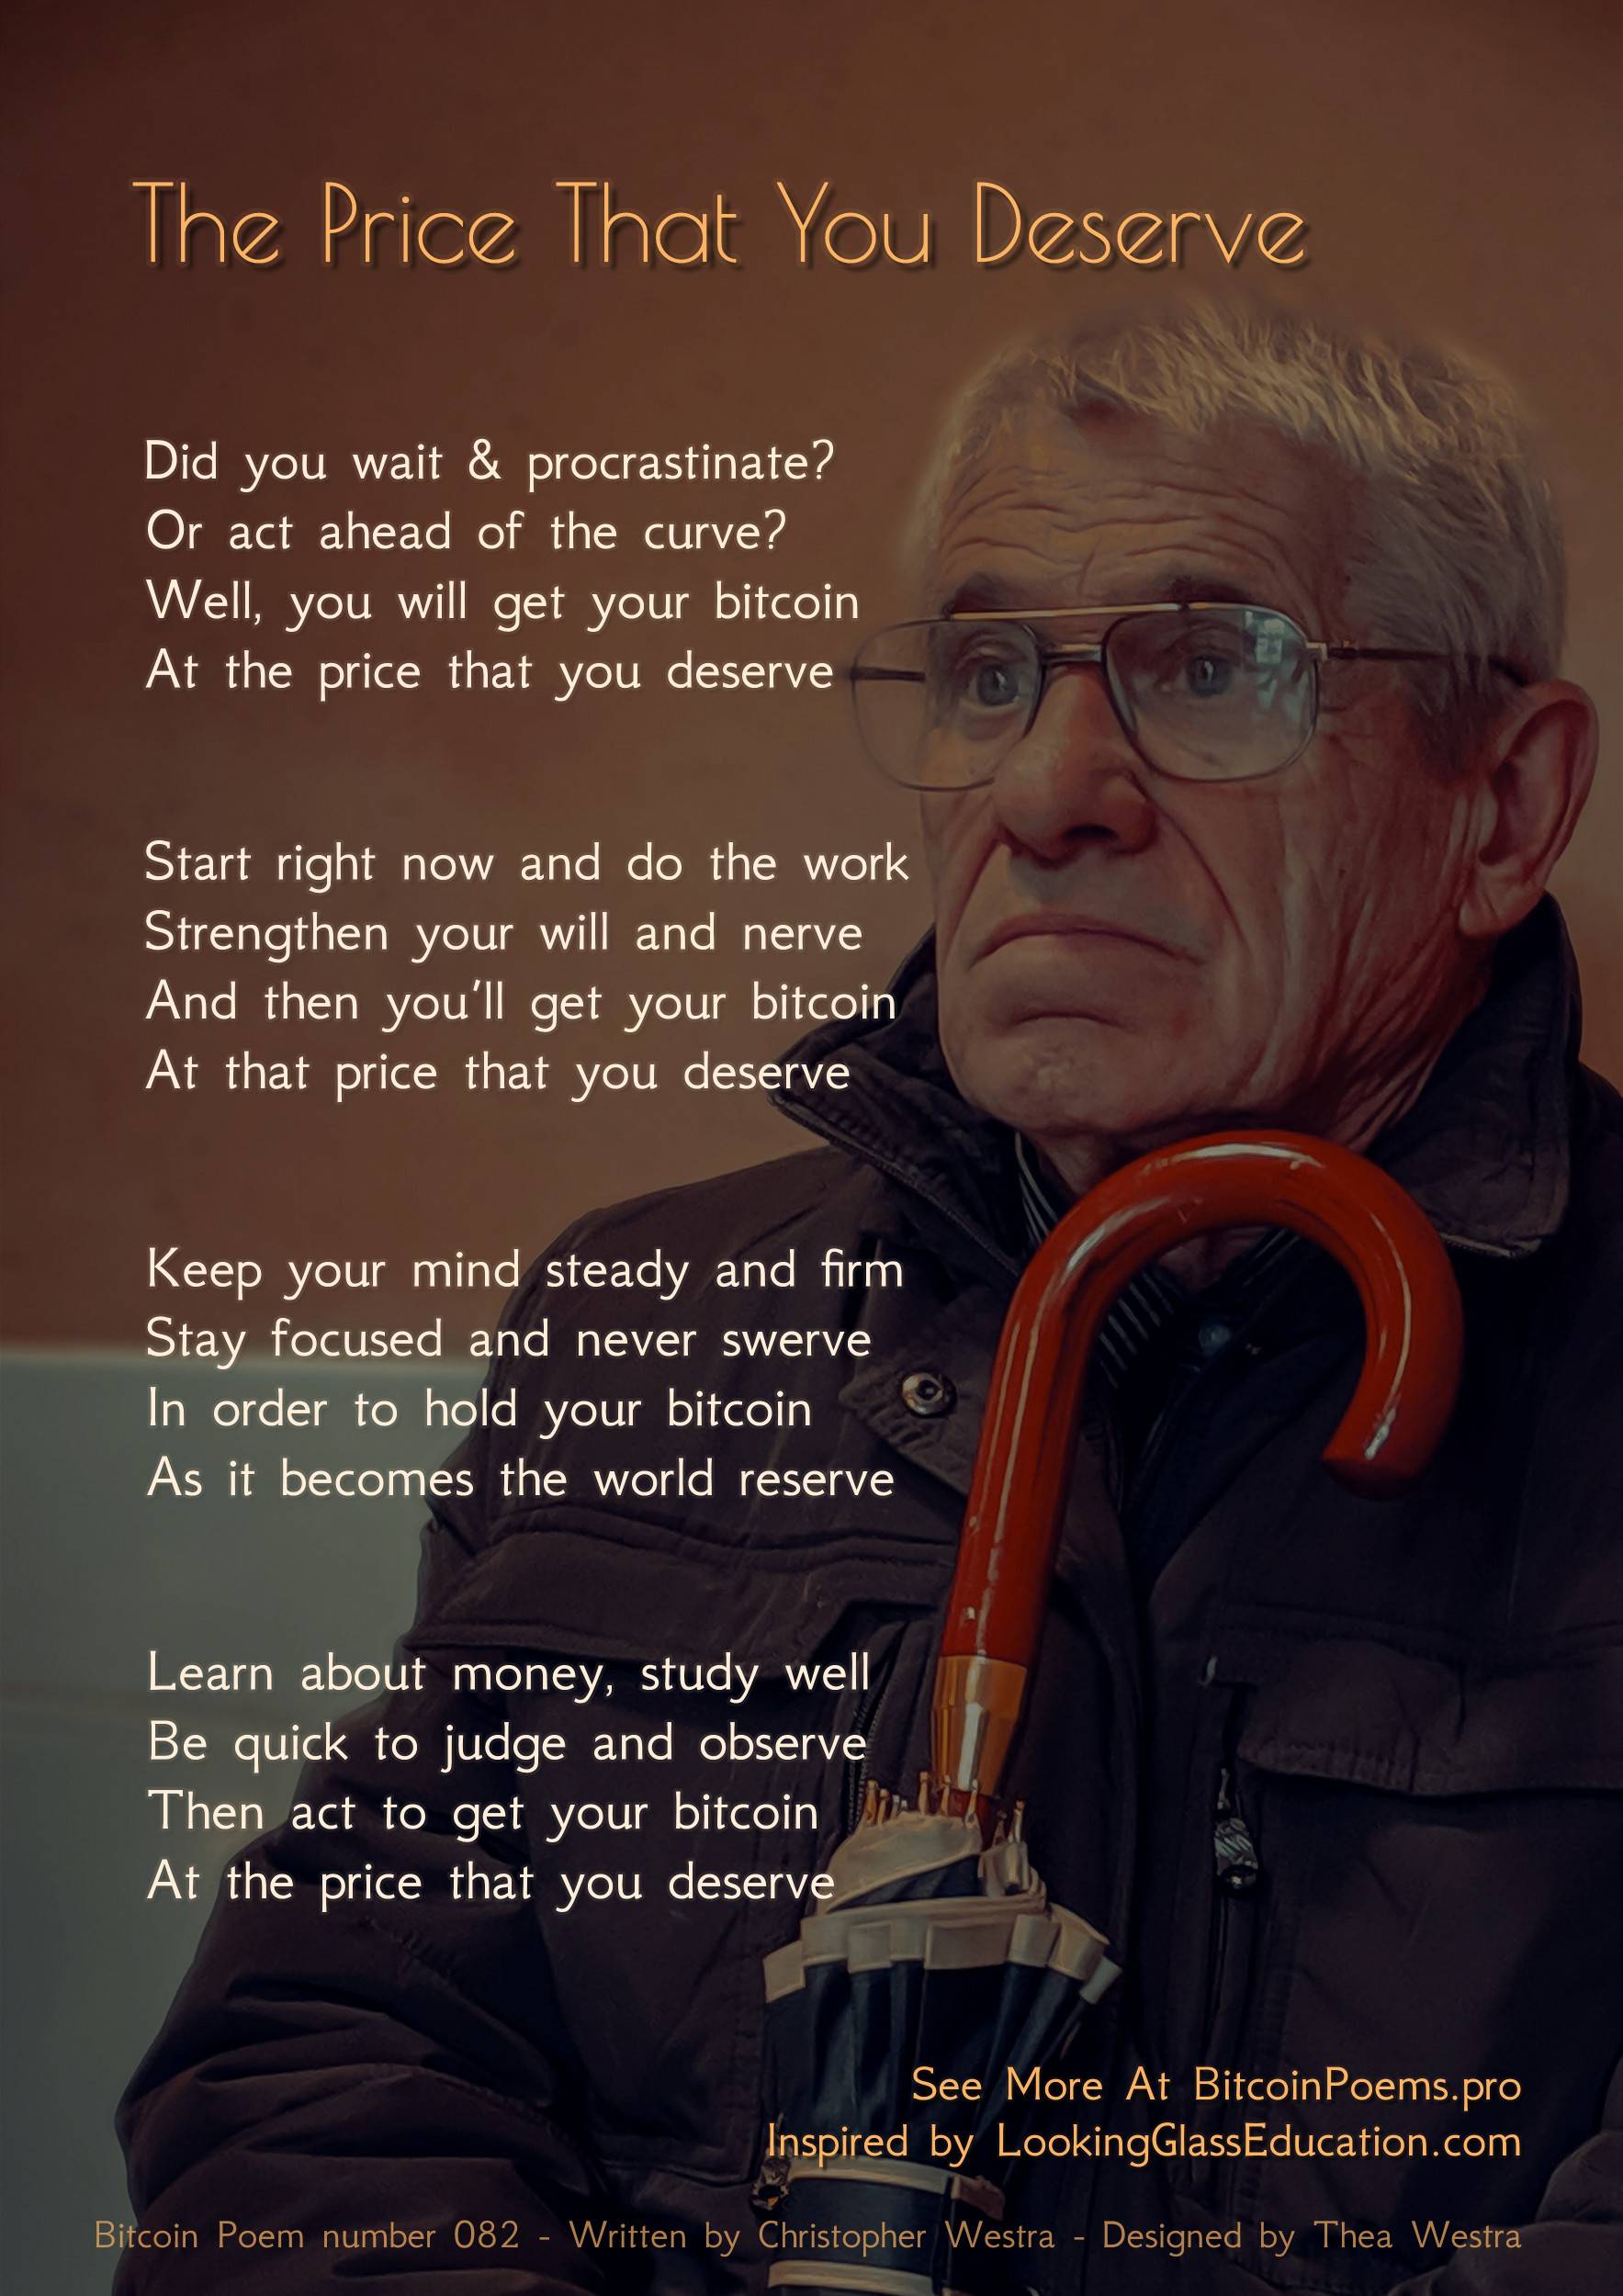 The Price That You Deserve - Bitcoin Poem 082 by Christopher Westra